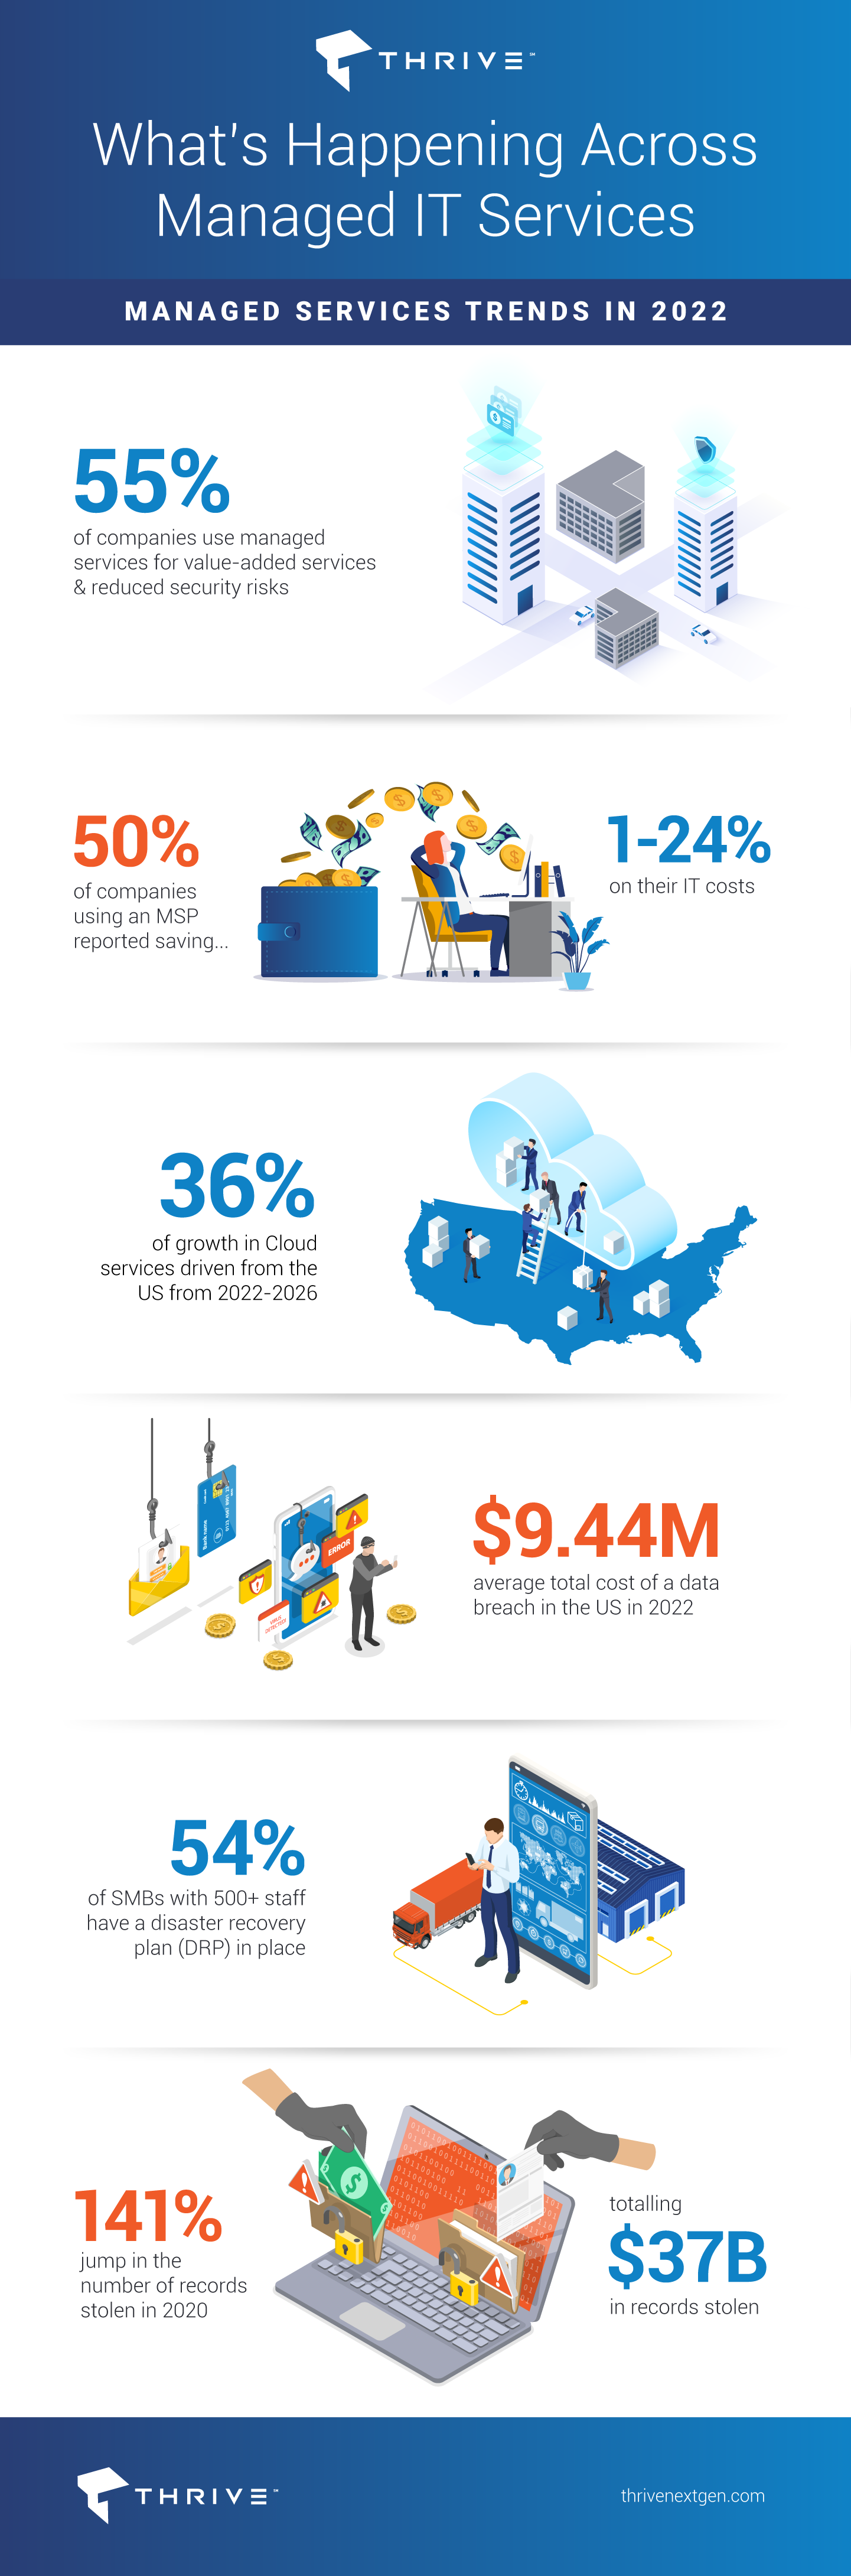 managed services trends 2022 infographic